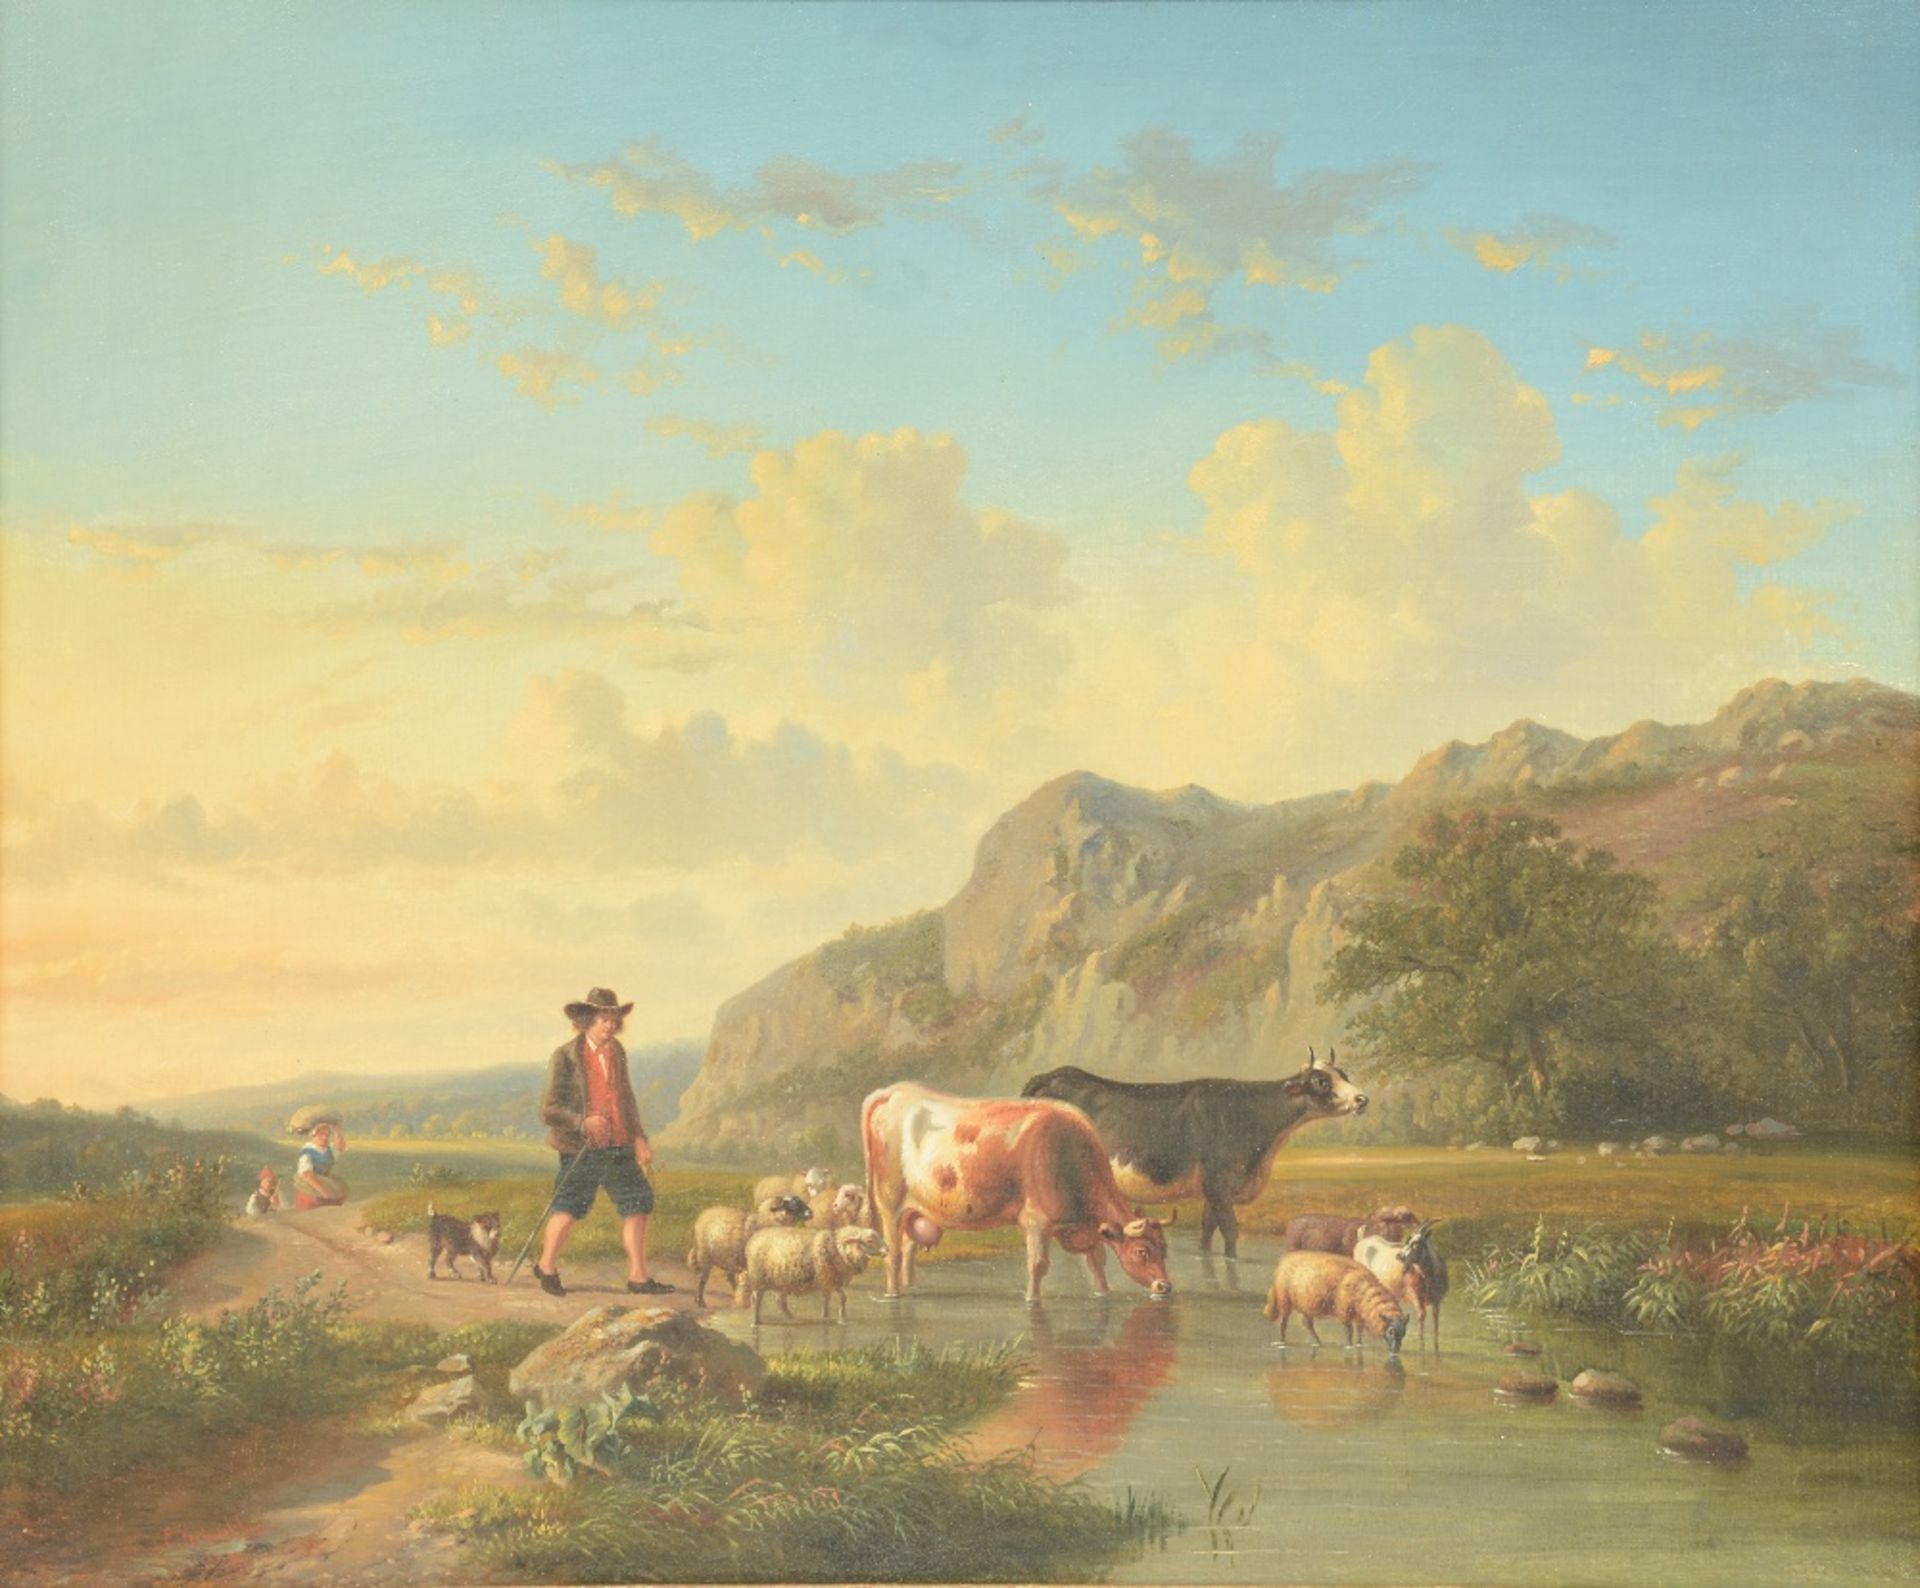 Verboeckhoven E., a shepherd with his cattle near a wed, oil on canvas, 51 x 63 cm